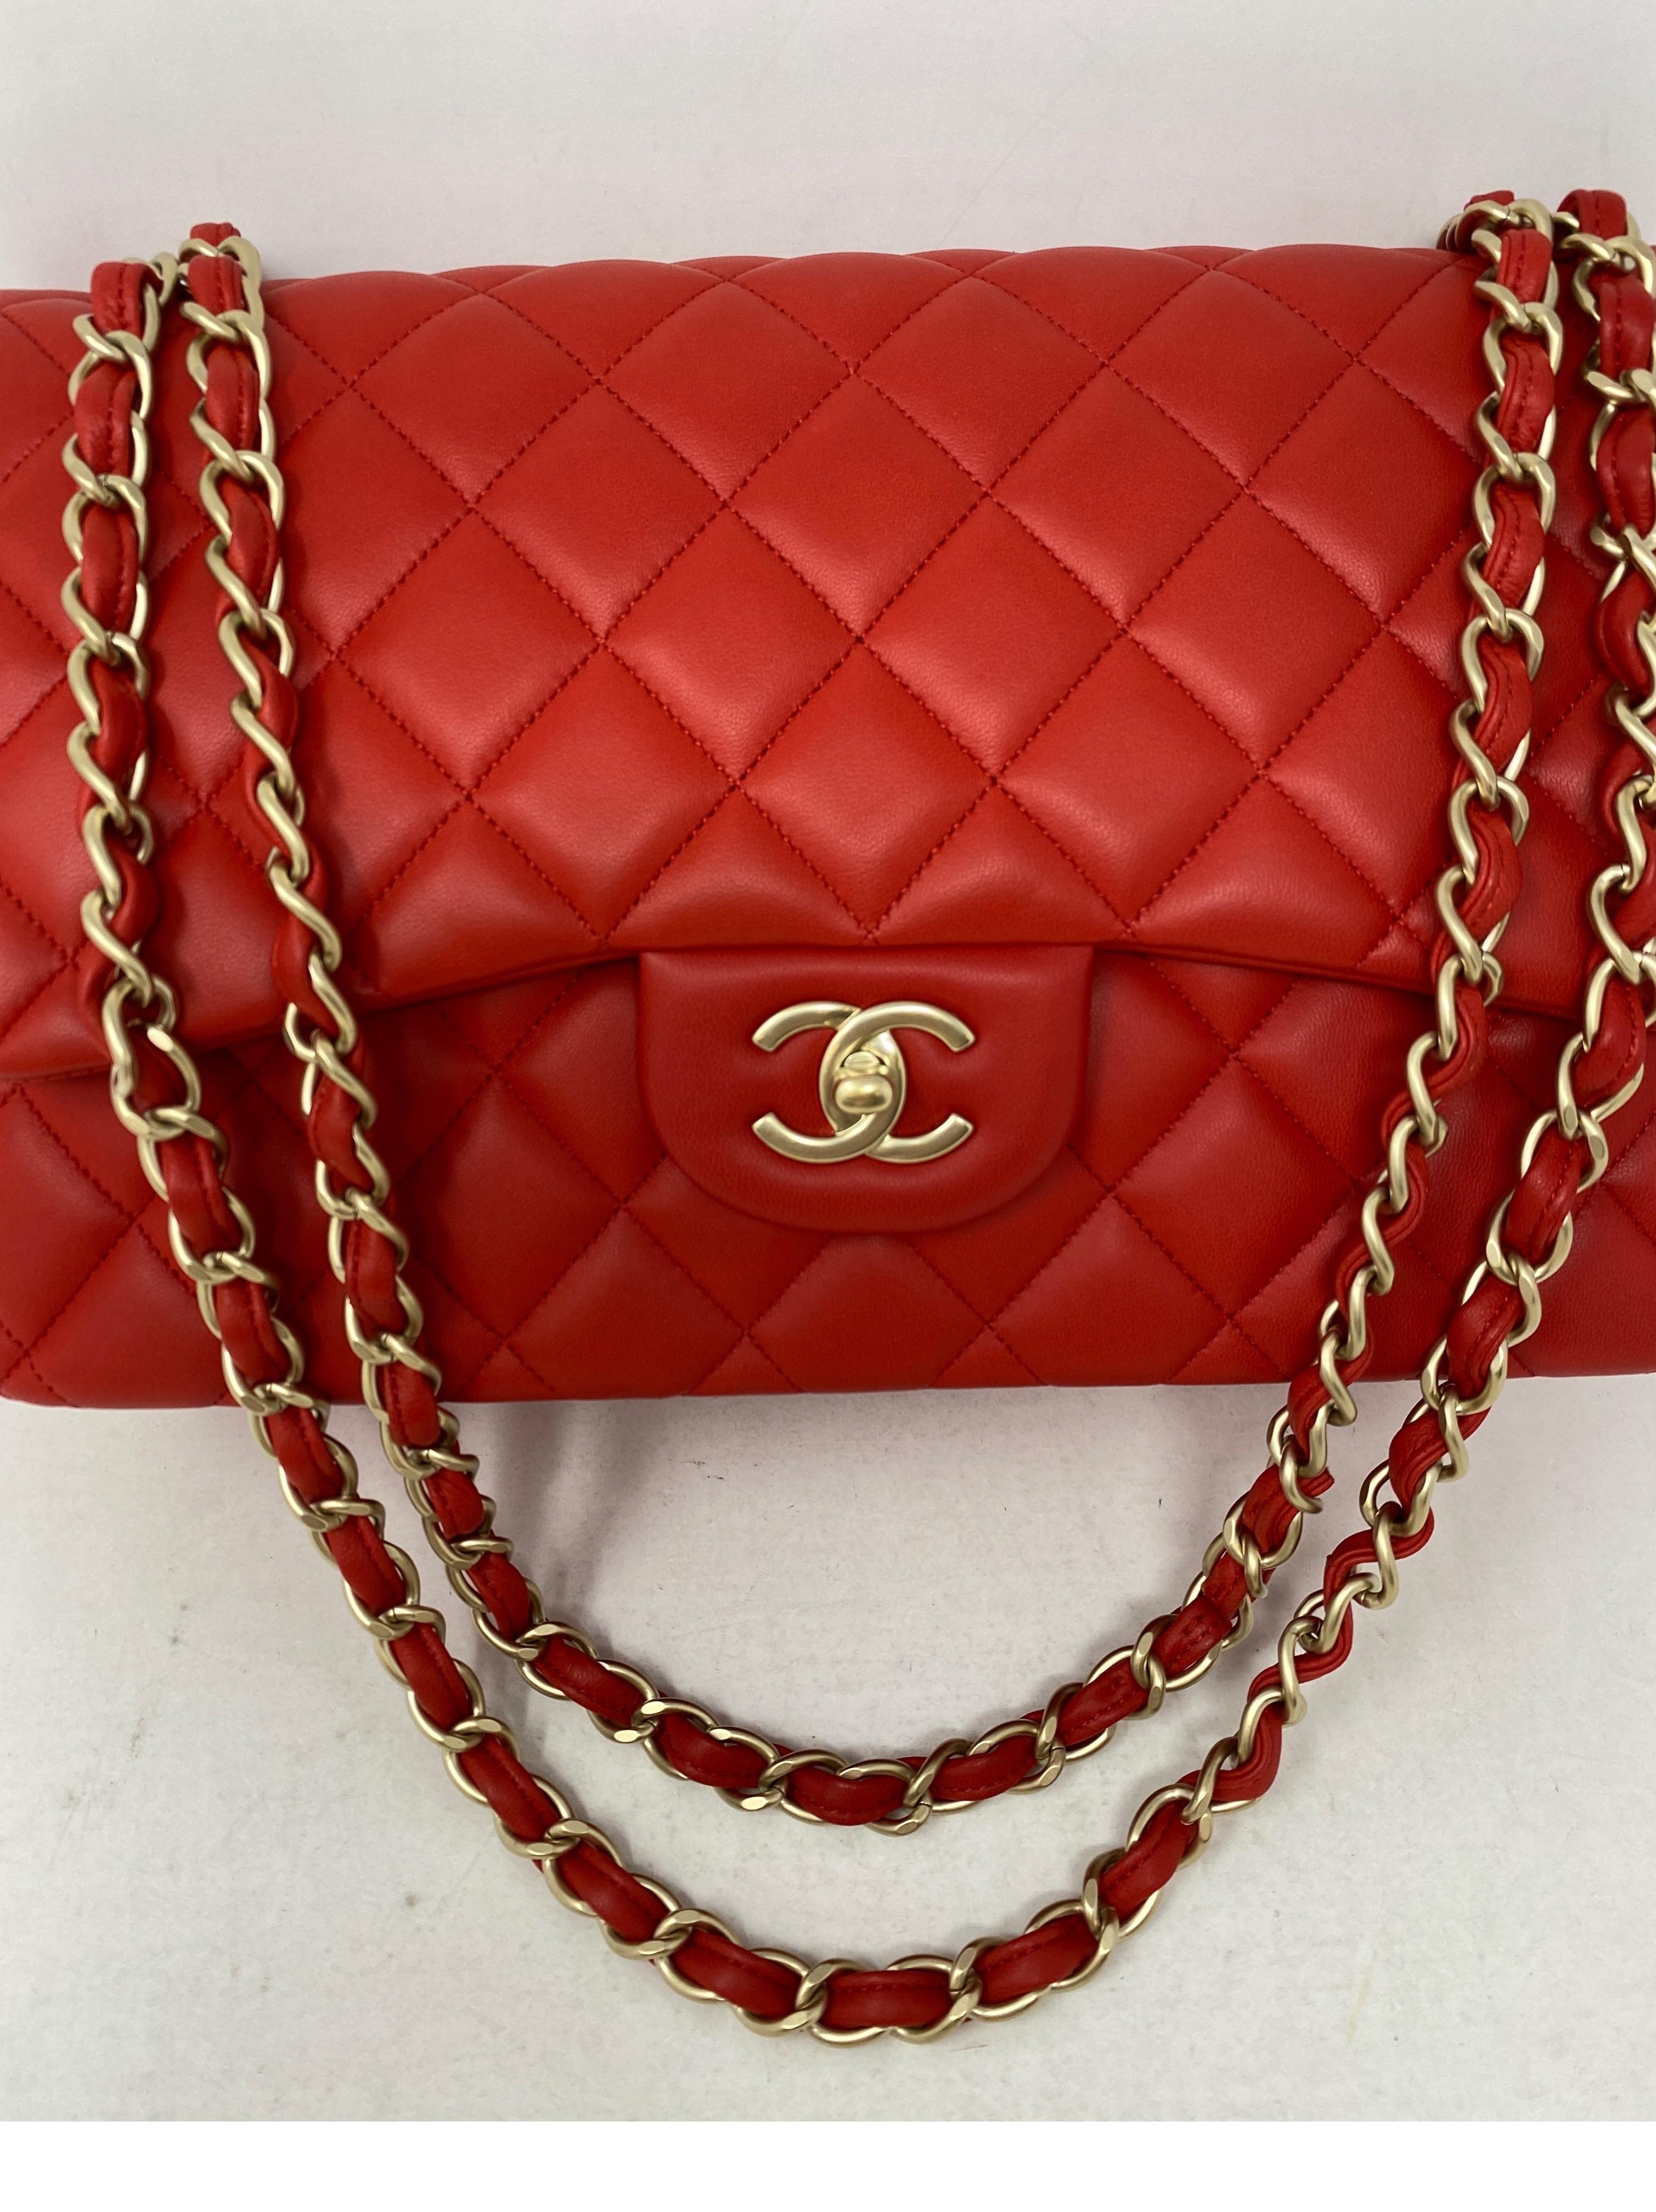 Chanel Red Jumbo Double Flap Bag. Gorgeous bright red lambskin leather. Gold hardware. Double flap bag. Jumbo size bag can be worn crossbody or doubled as a shoulder bag. Rare color combo. Includes authenticity card and dust cover. Guaranteed